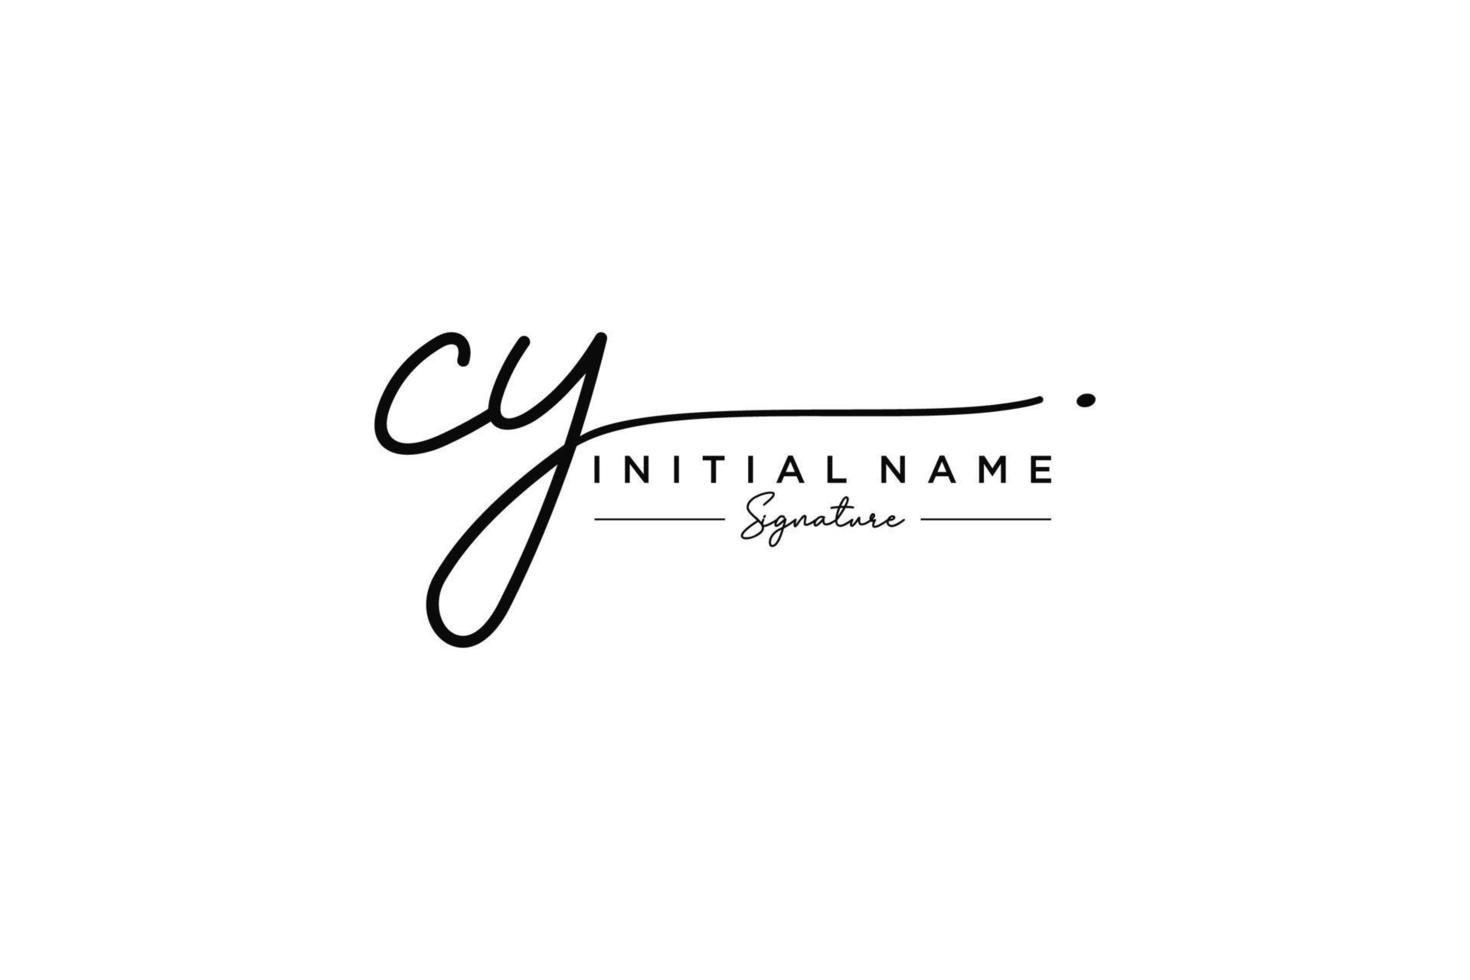 Initial CY signature logo template vector. Hand drawn Calligraphy lettering Vector illustration.